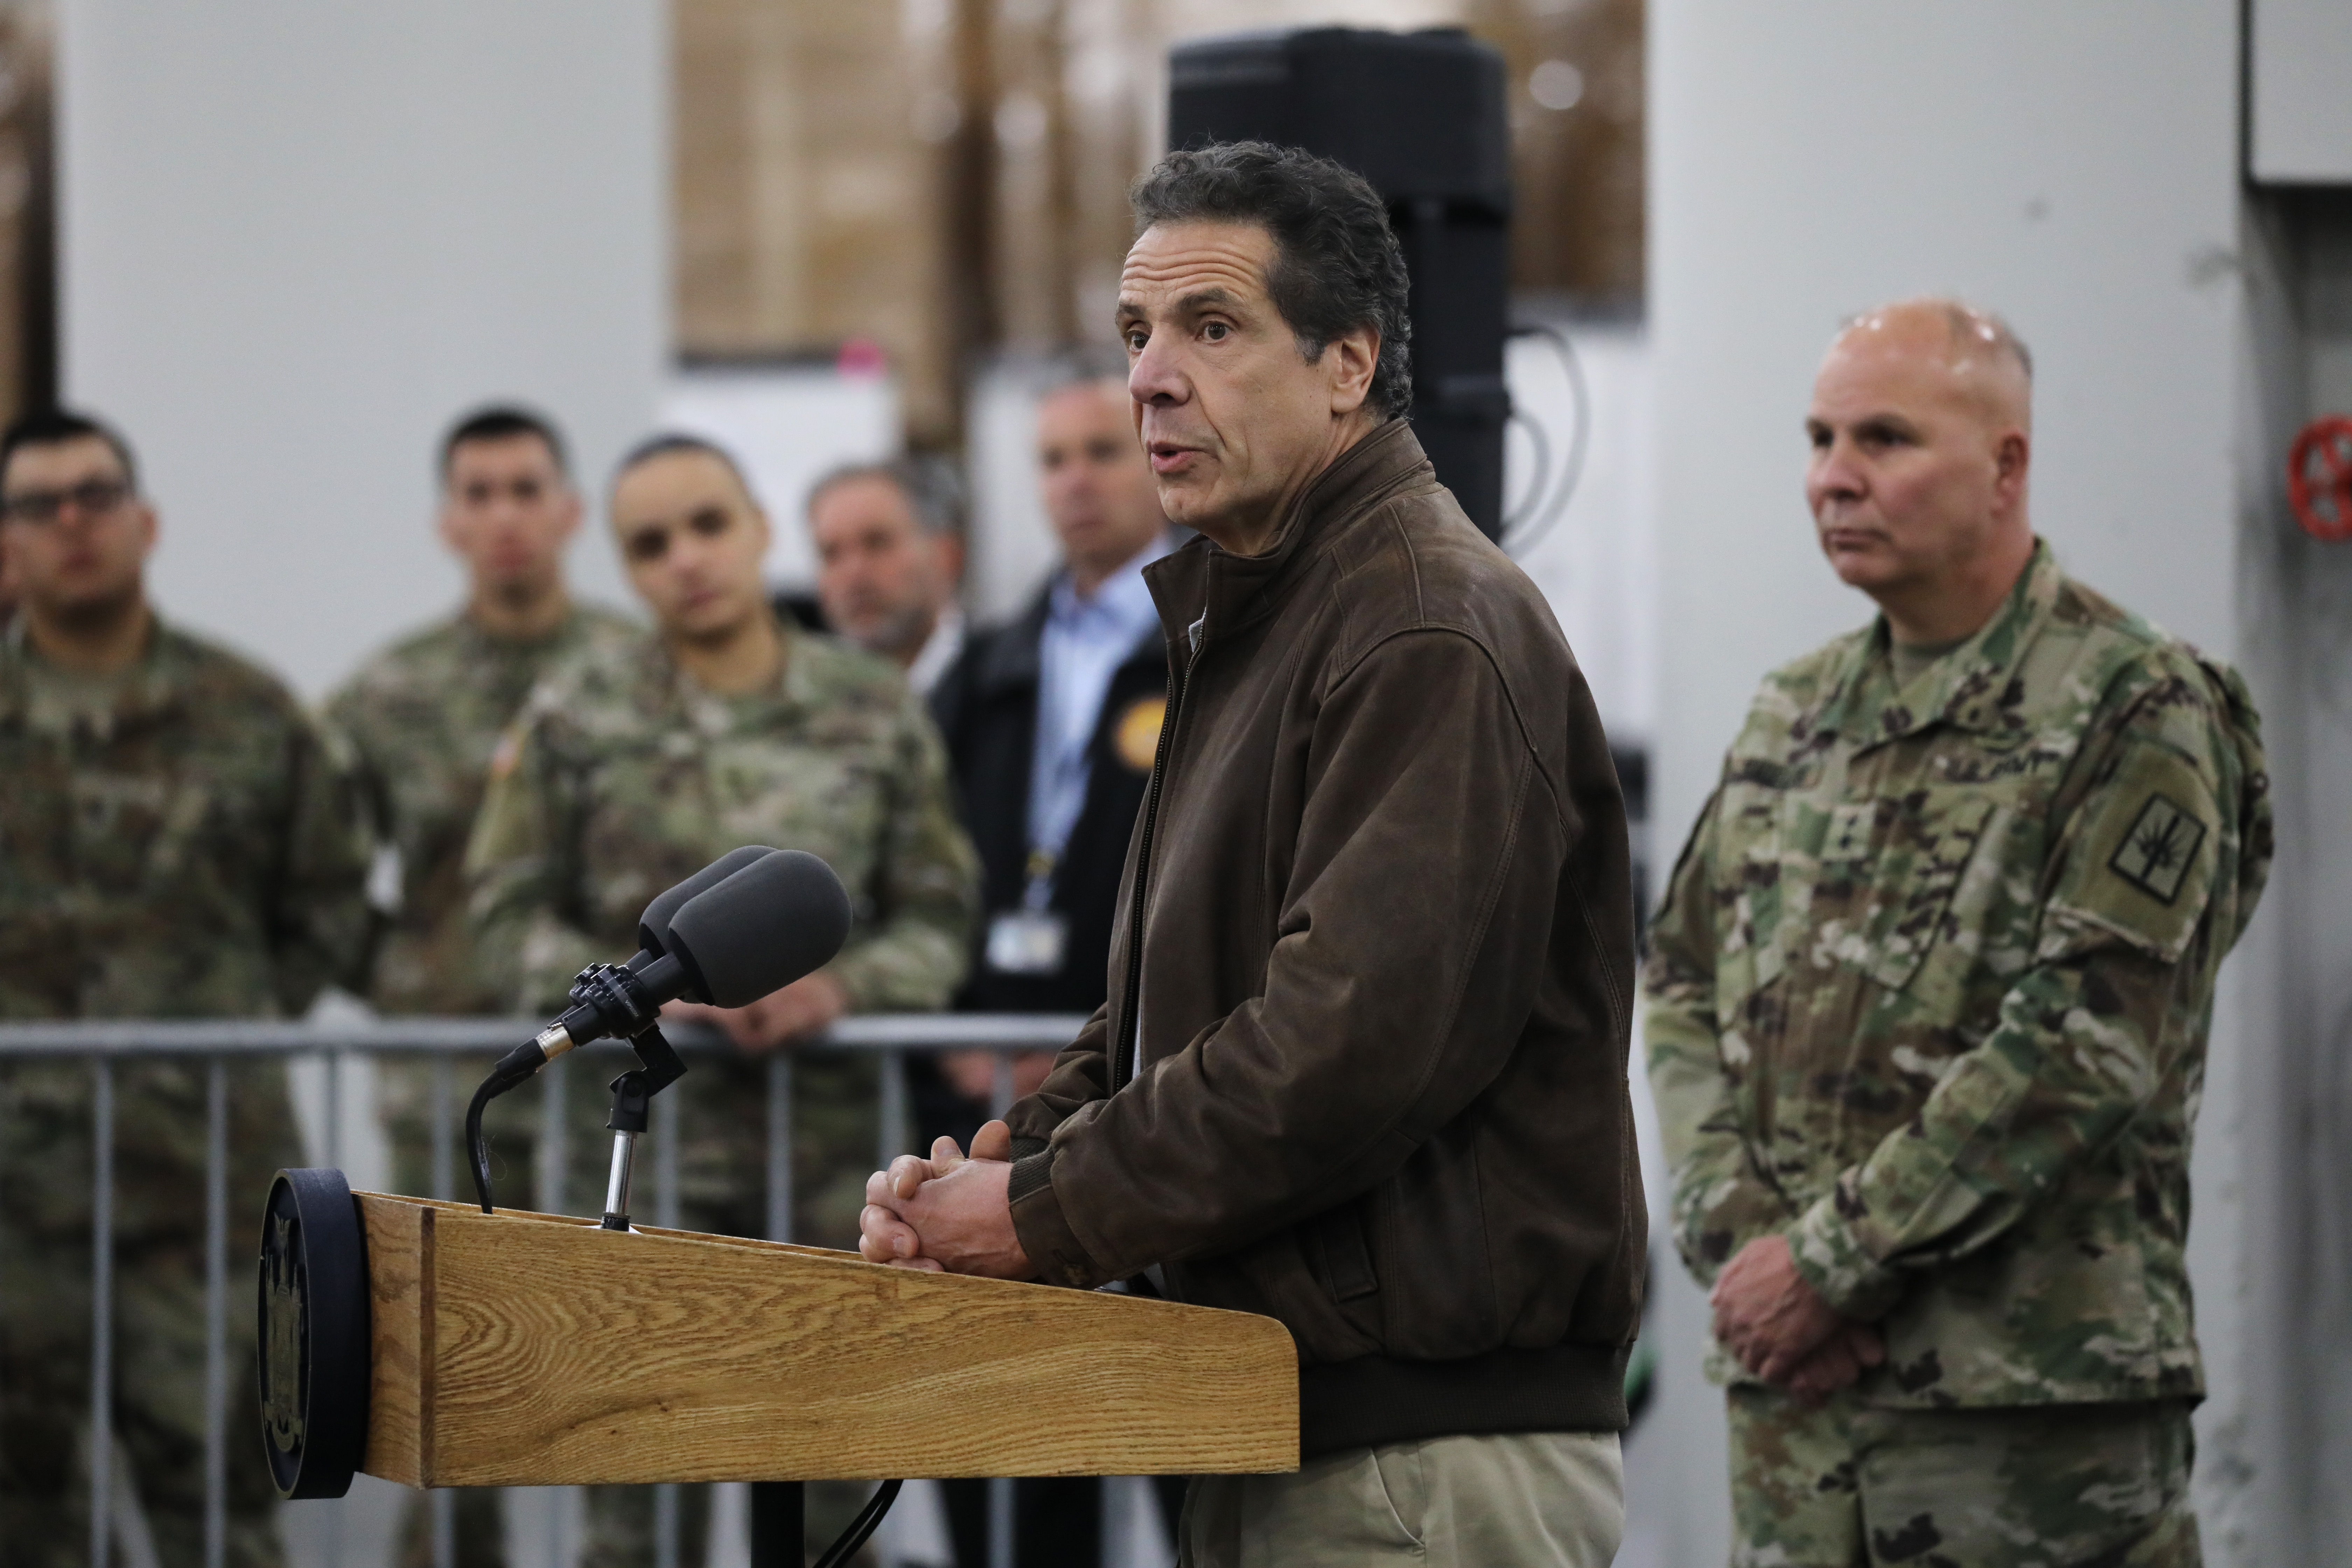 NEW YORK, NEW YORK - MARCH 23: New York Governor Andrew Cuomo speaks to the media and members of the National Guard at the Javits Convention Center which is being turned into a hospital to help fight coronavirus cases on March 23, 2020 in New York City. The plan is part of his New York state request for assistance to the federal government for four field hospital sites and aid from the U.S. Army Corps of Engineers. New York has been one of the hardest hit states in the nation with over 10,000 cases of COVID-19. (Photo by Spencer Platt/Getty Images)